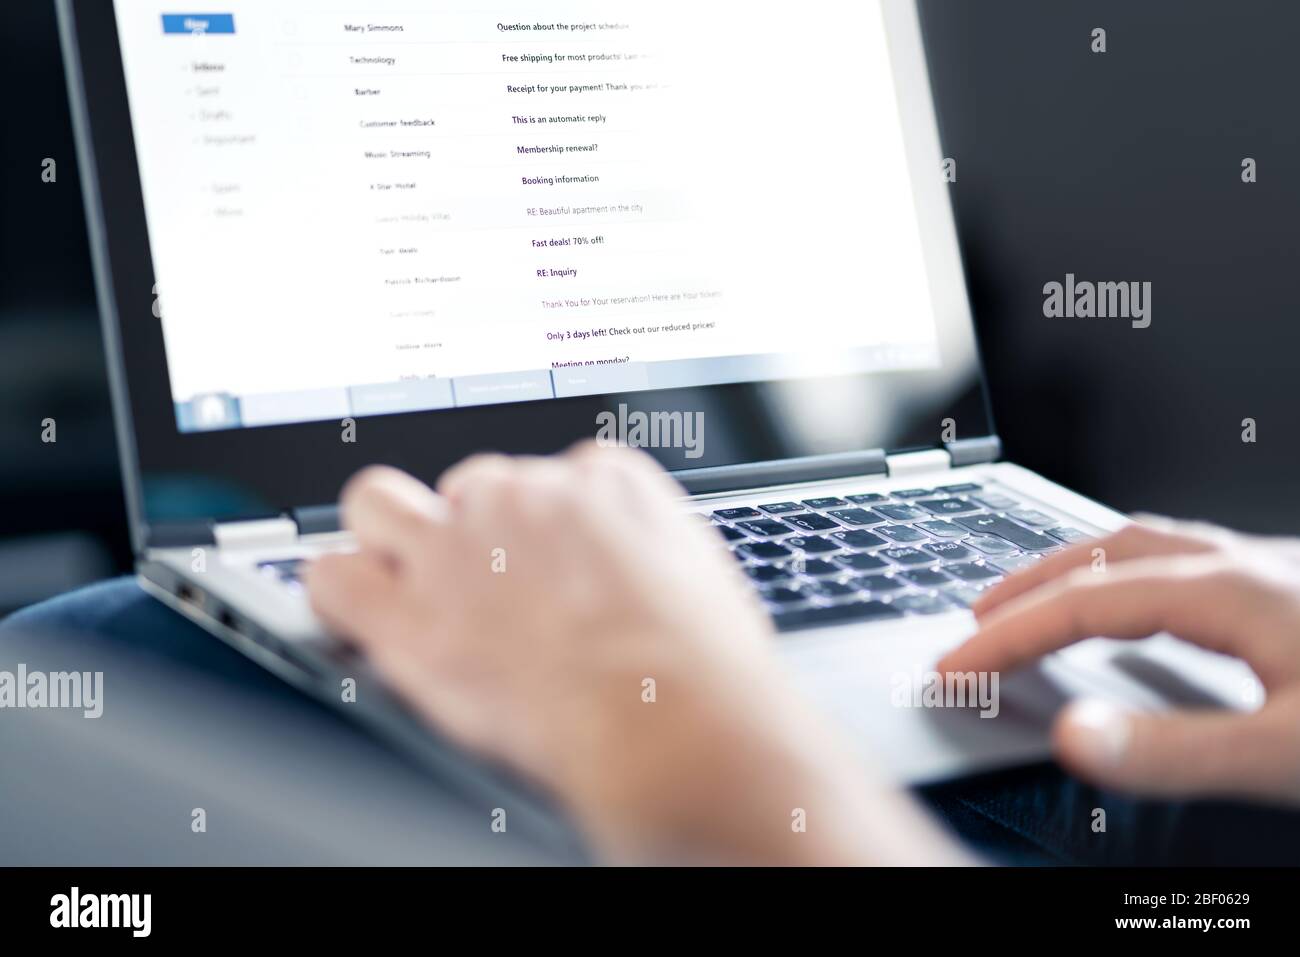 Email inbox full of messages and text. Man reading electronic mail with laptop. Spam, junk and e marketing on screen. Stock Photo